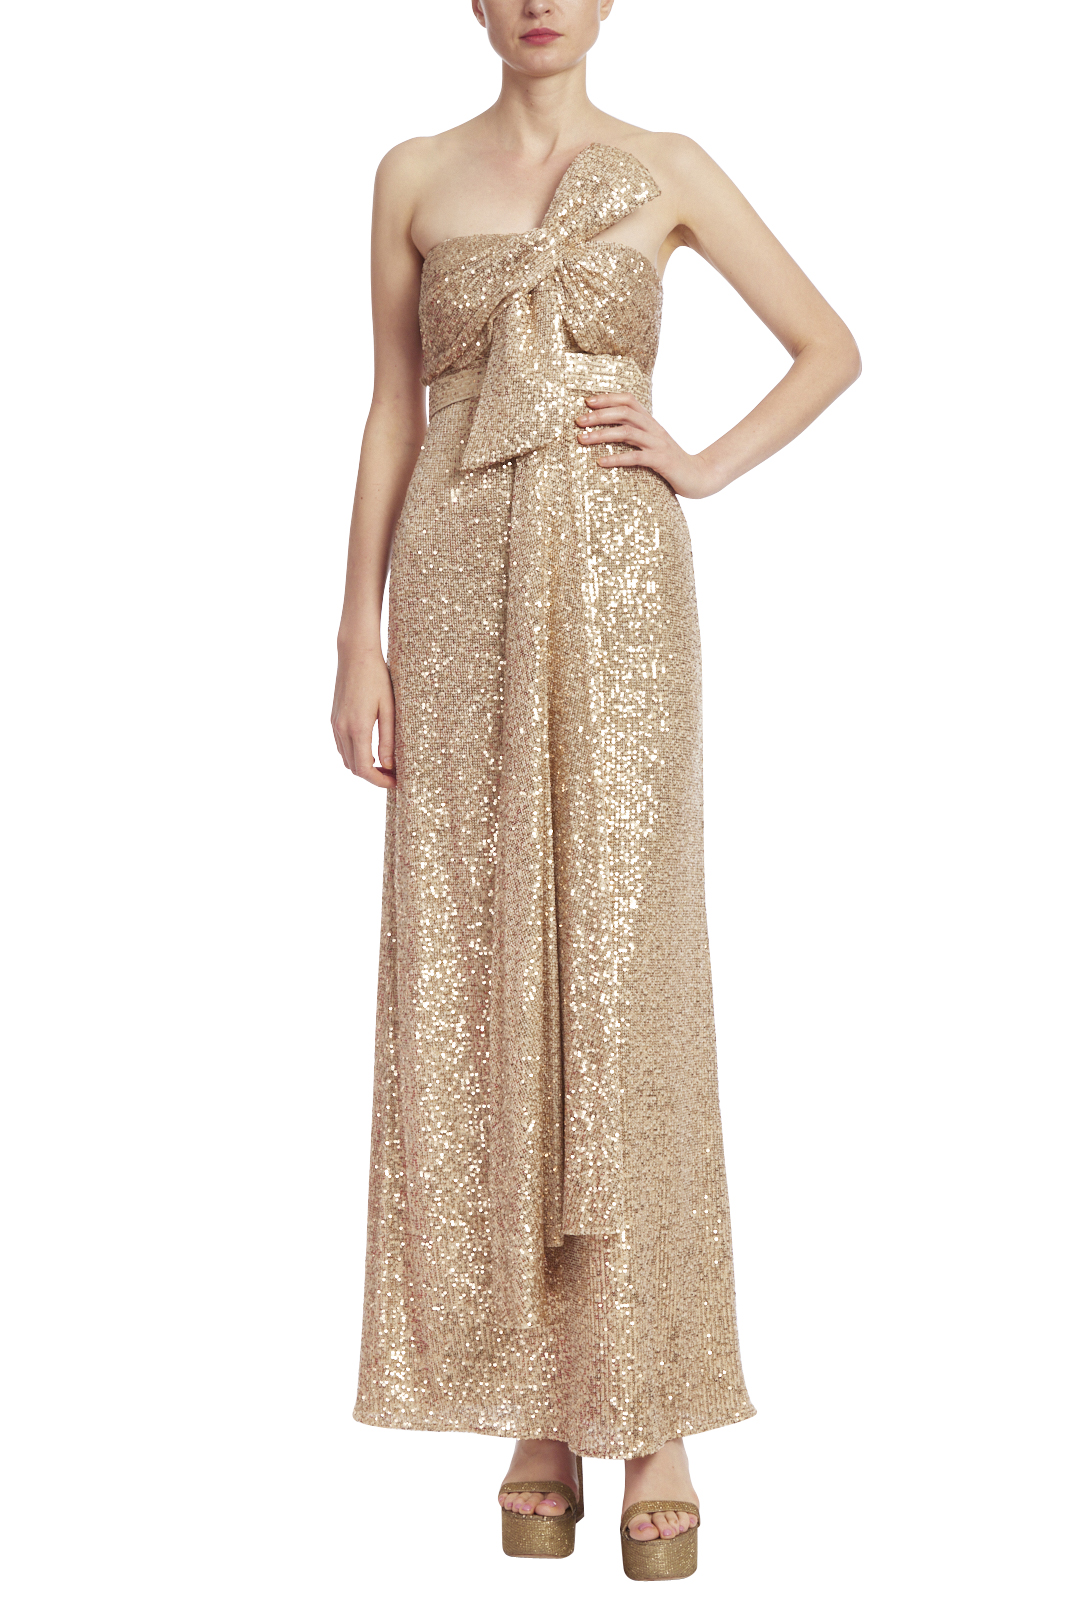 Sequin Dress for the Mother-of-the-Bride